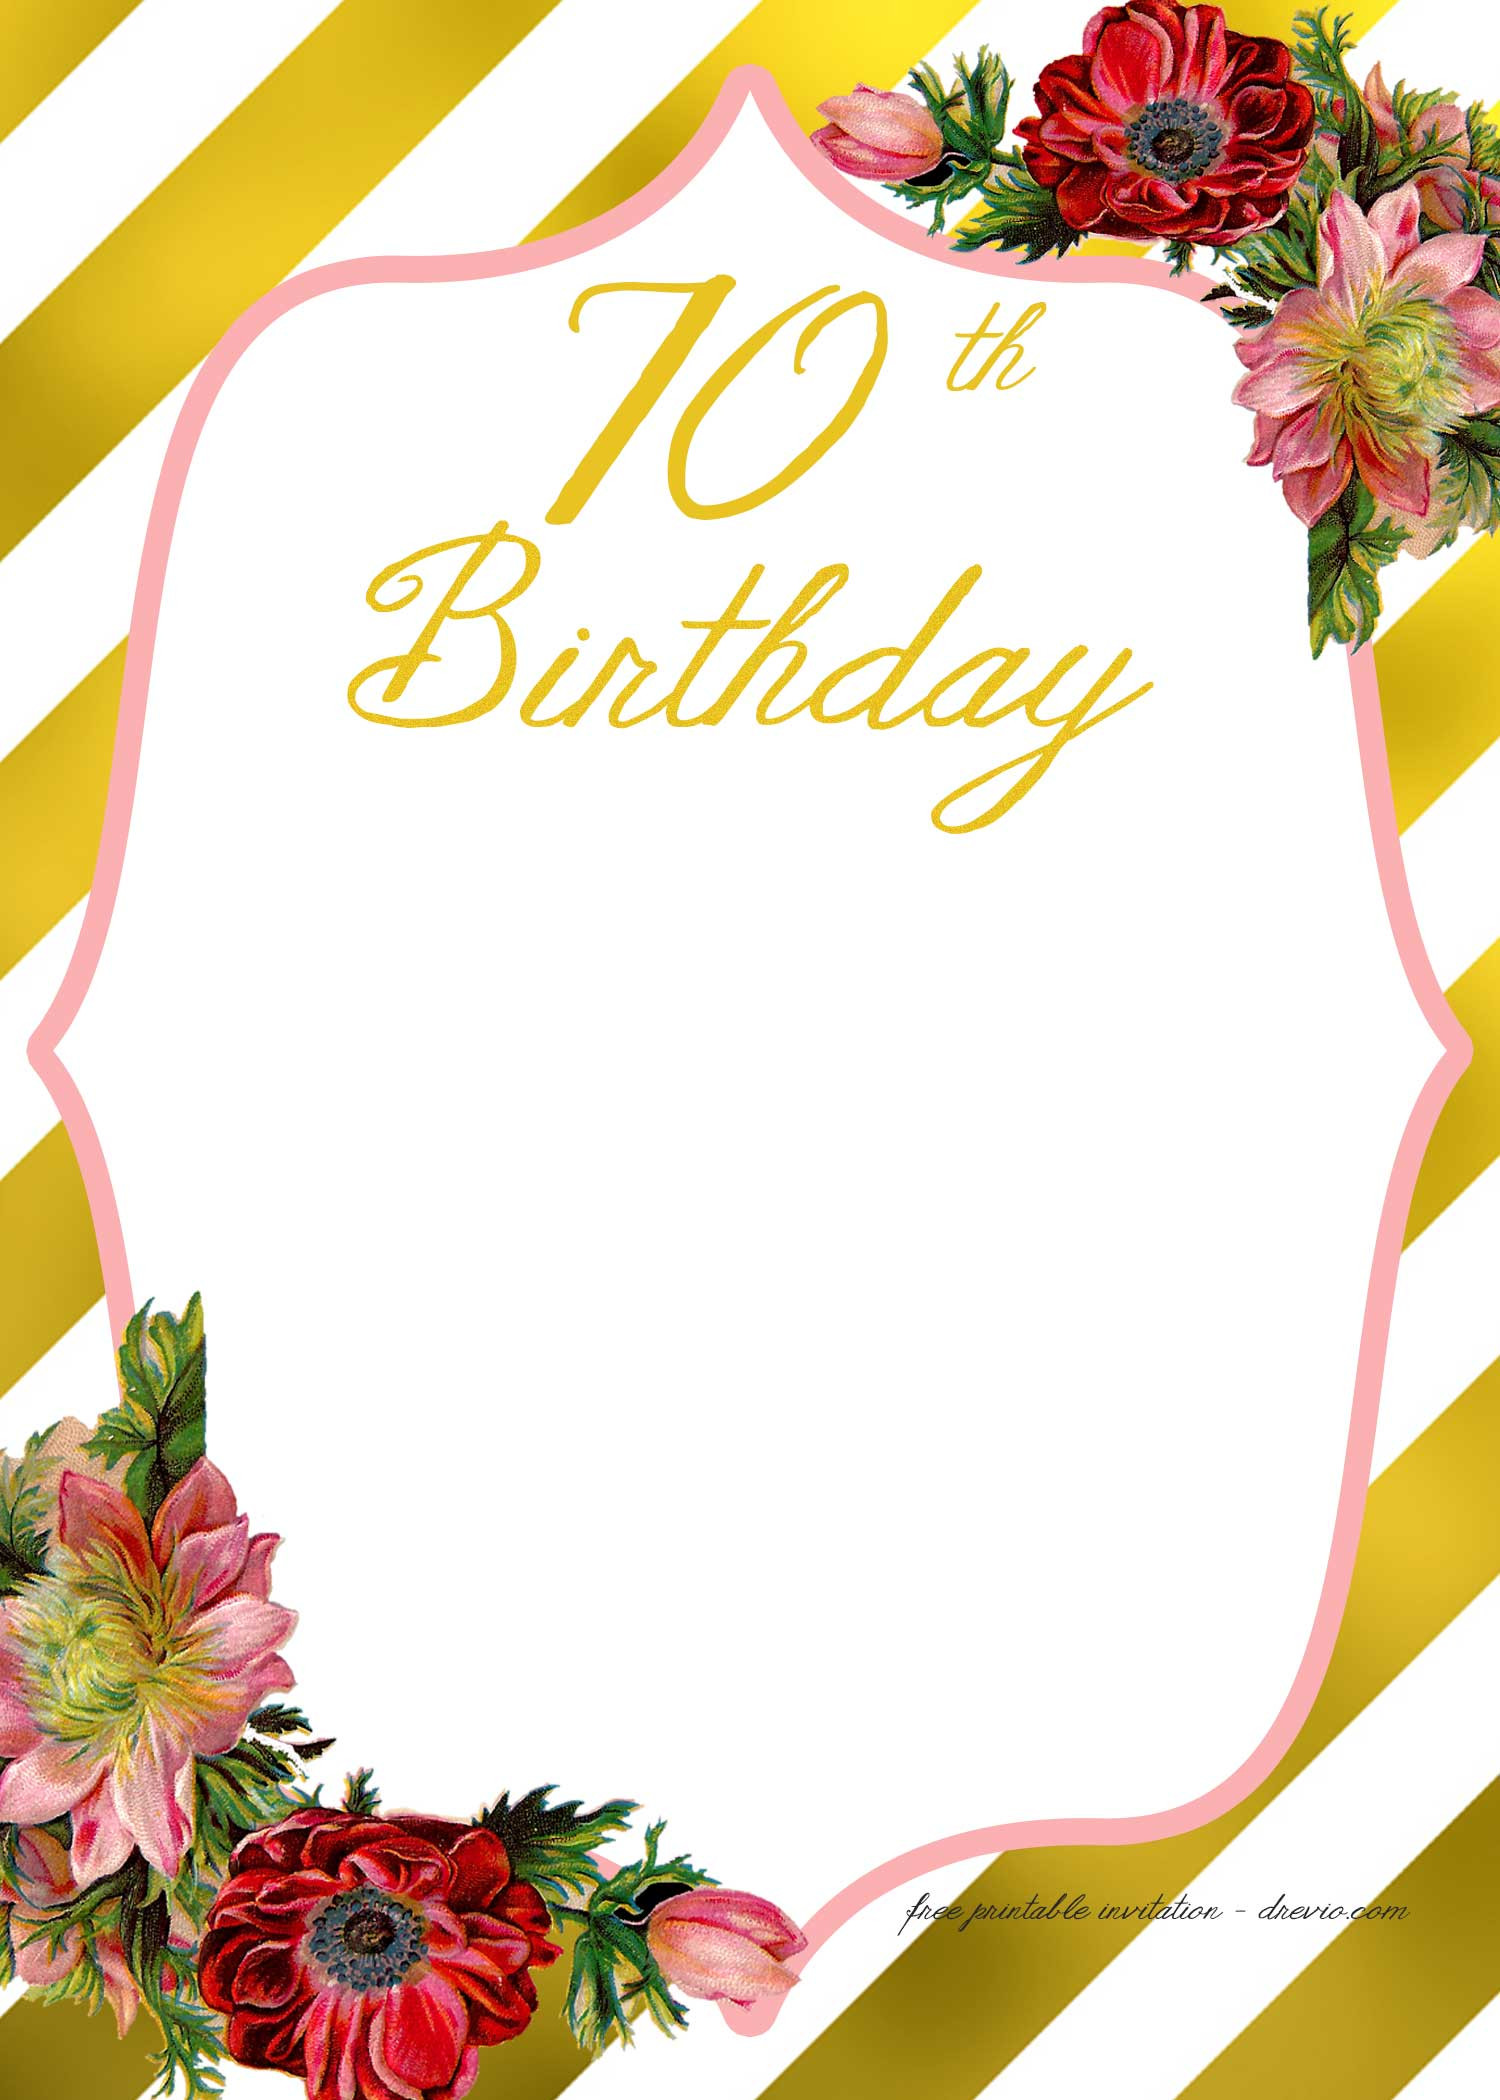 Birthday Party Invitations Template
 Adult Birthday Invitations Template for 50th years old